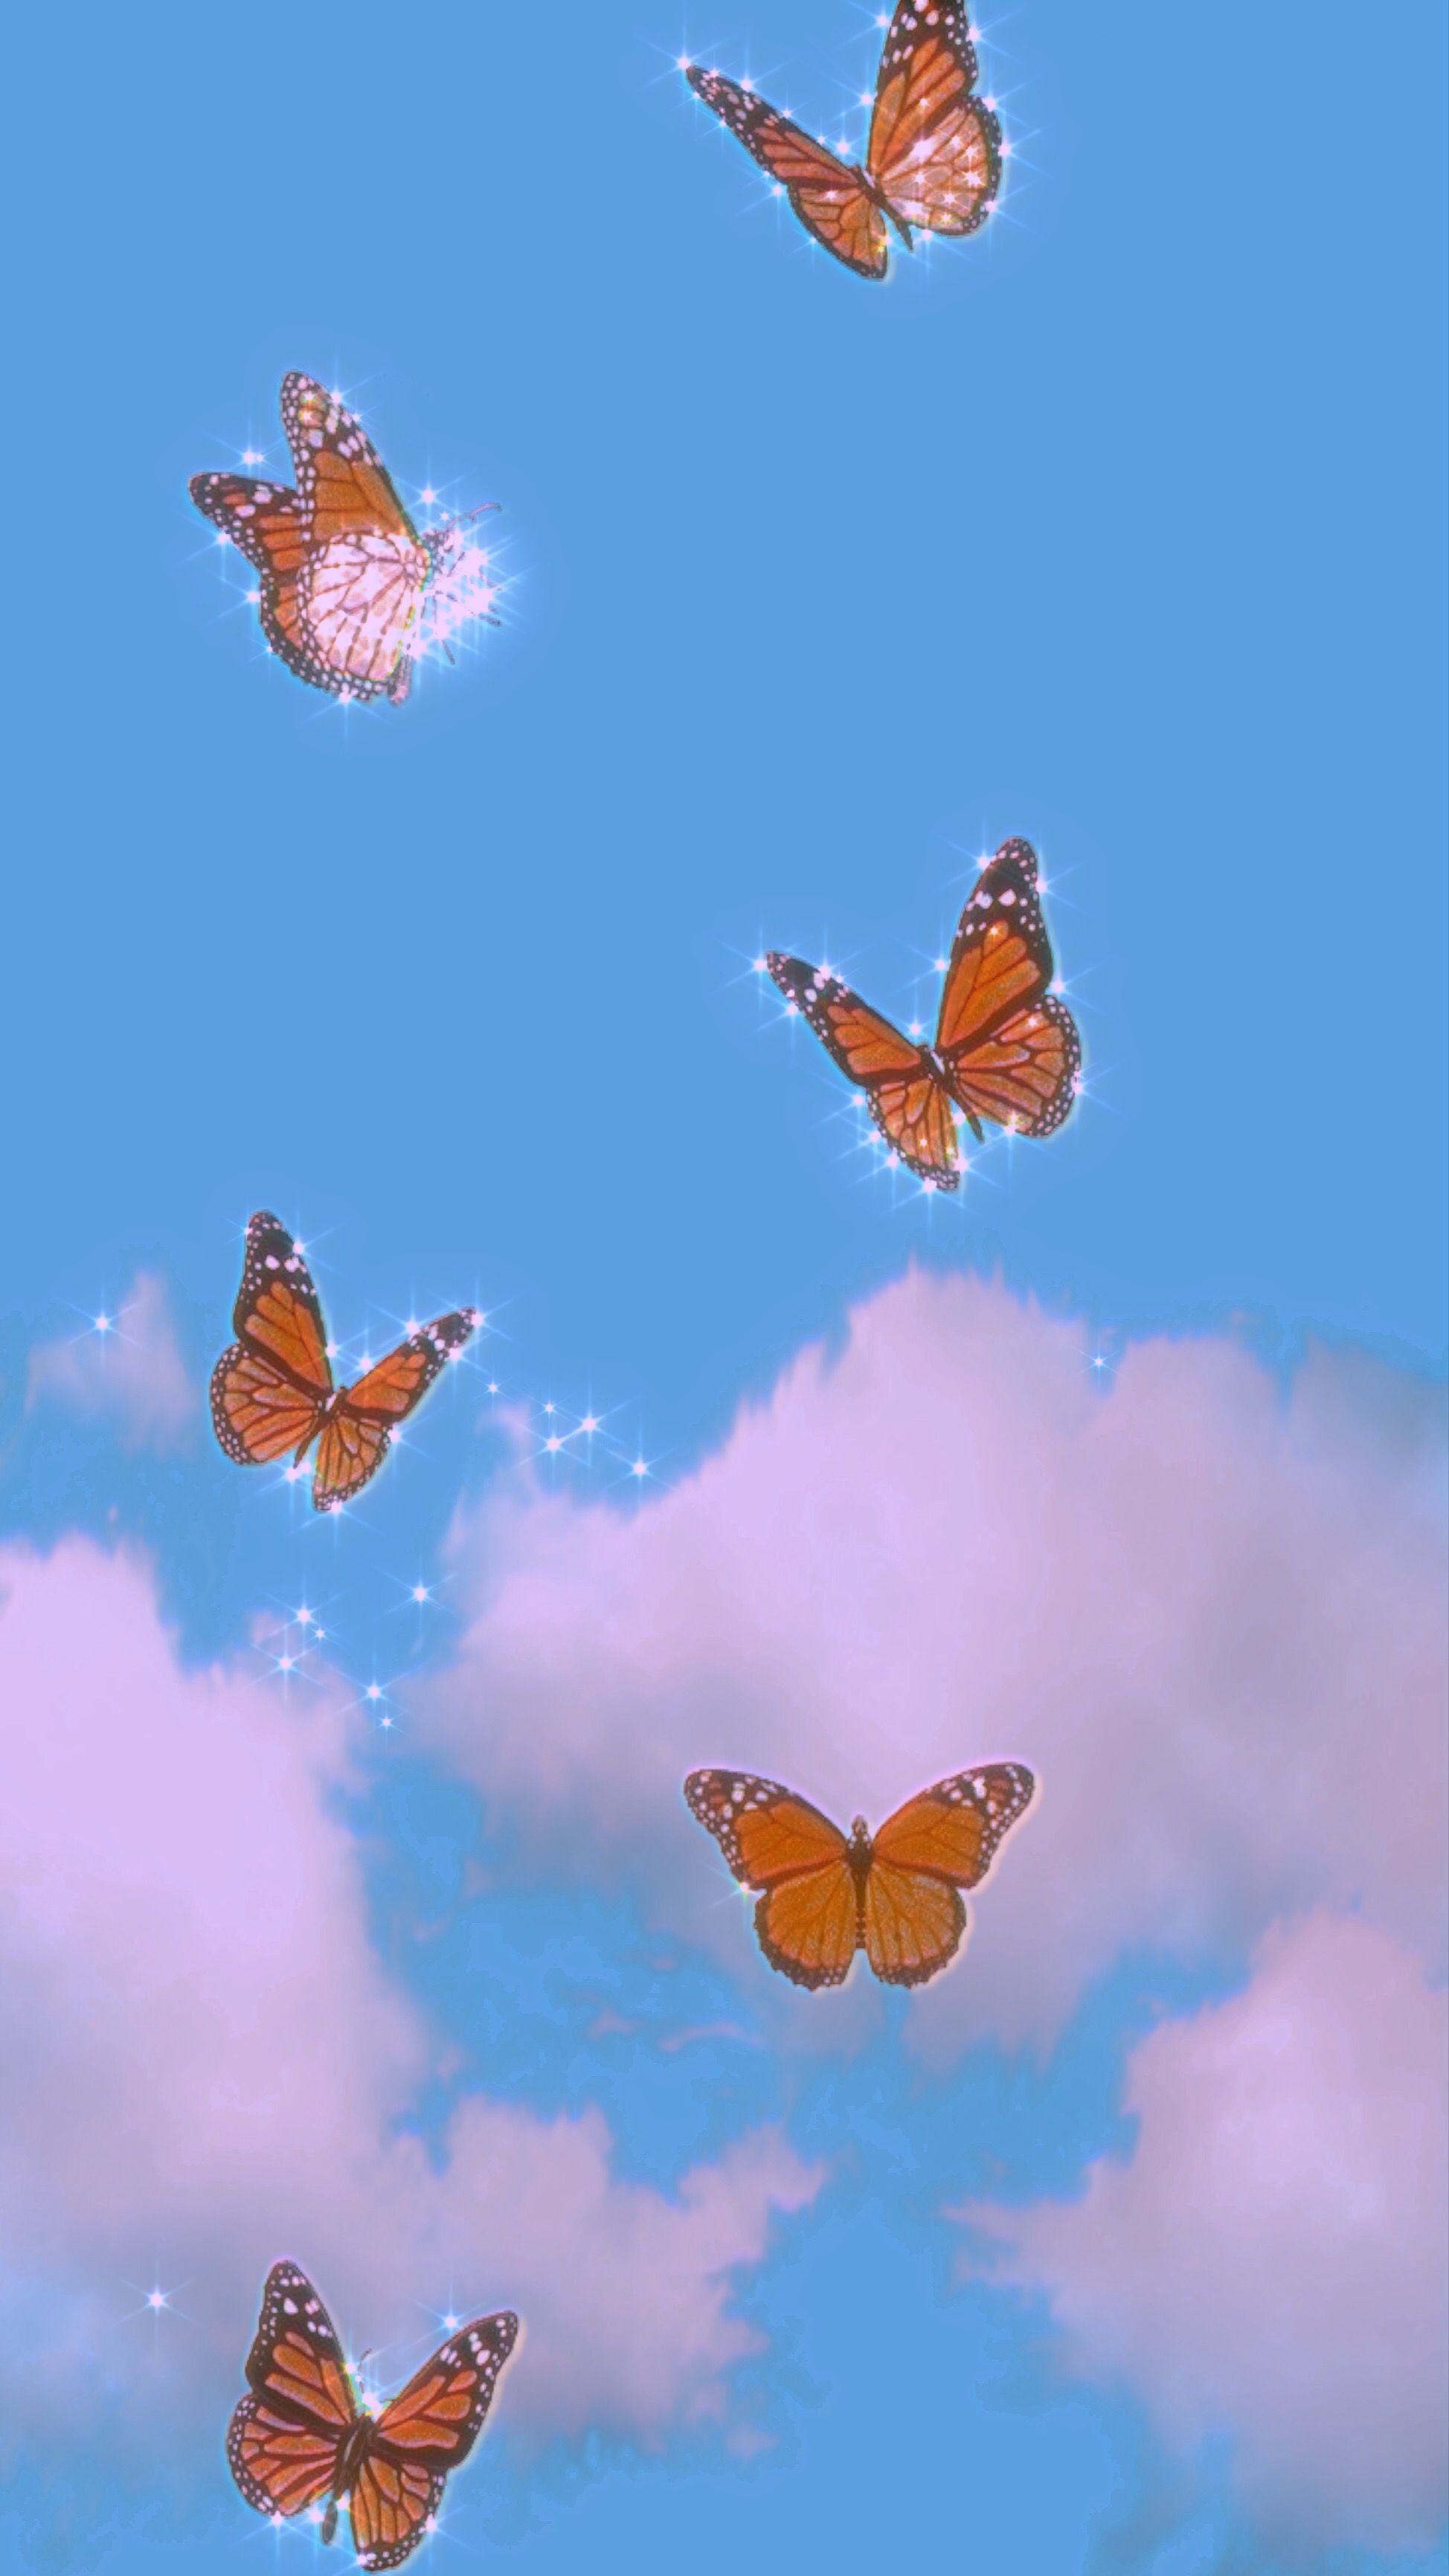 Butterfly. Aesthetic iphone wallpaper, iPhone wallpaper tumblr aesthetic, Simple iphone wallpaper